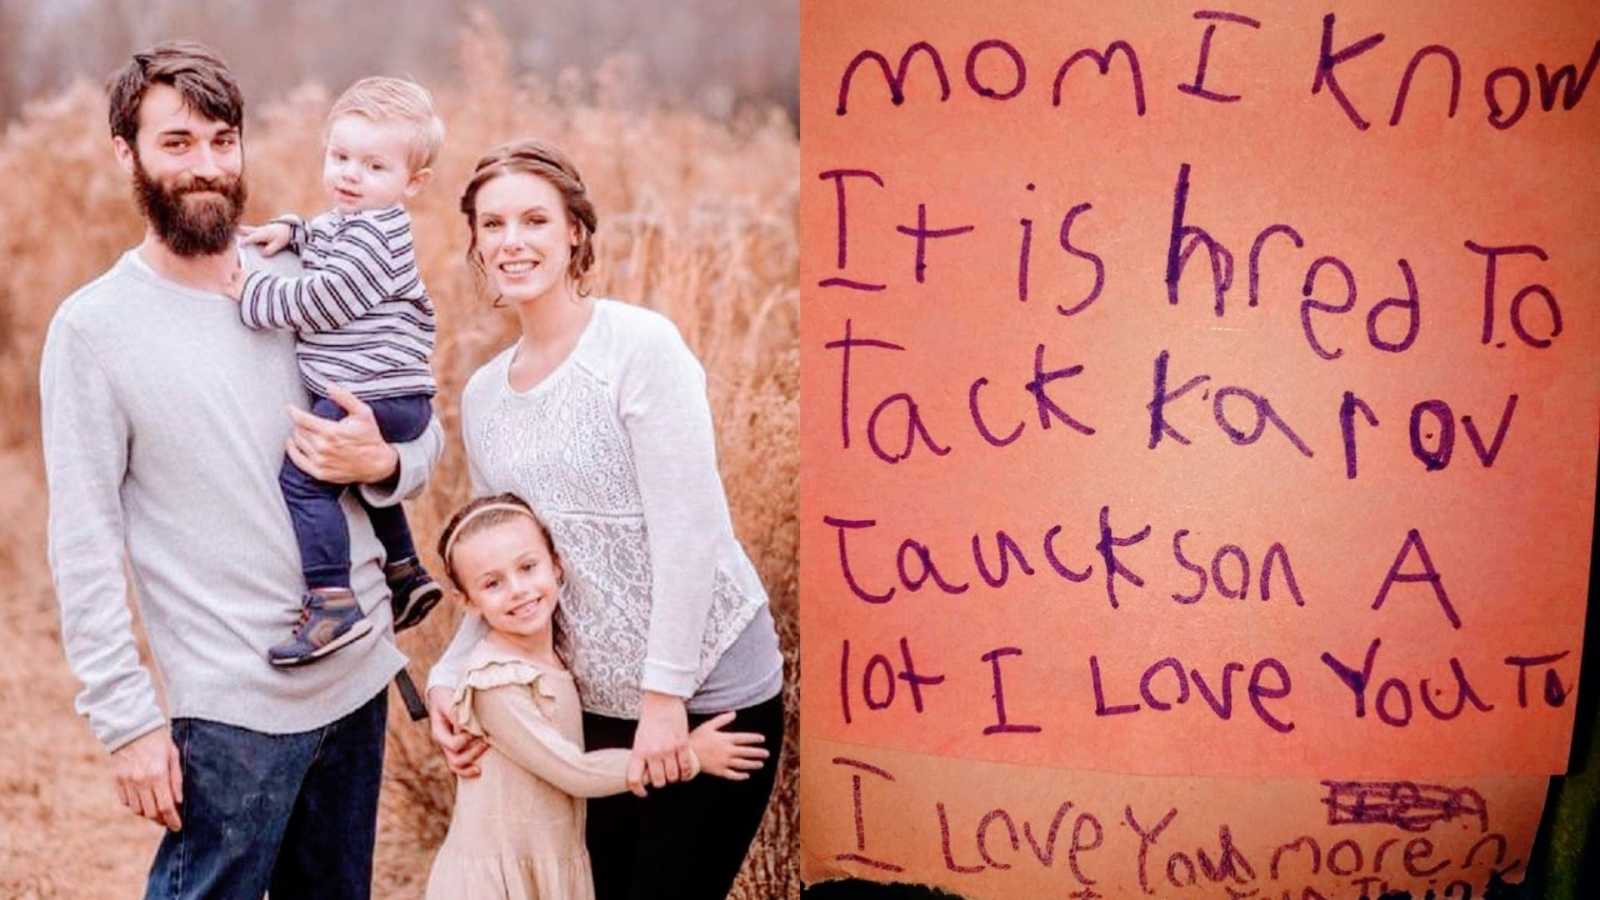 A family with two children stand in a field and a note written in purple ink on a post-it note